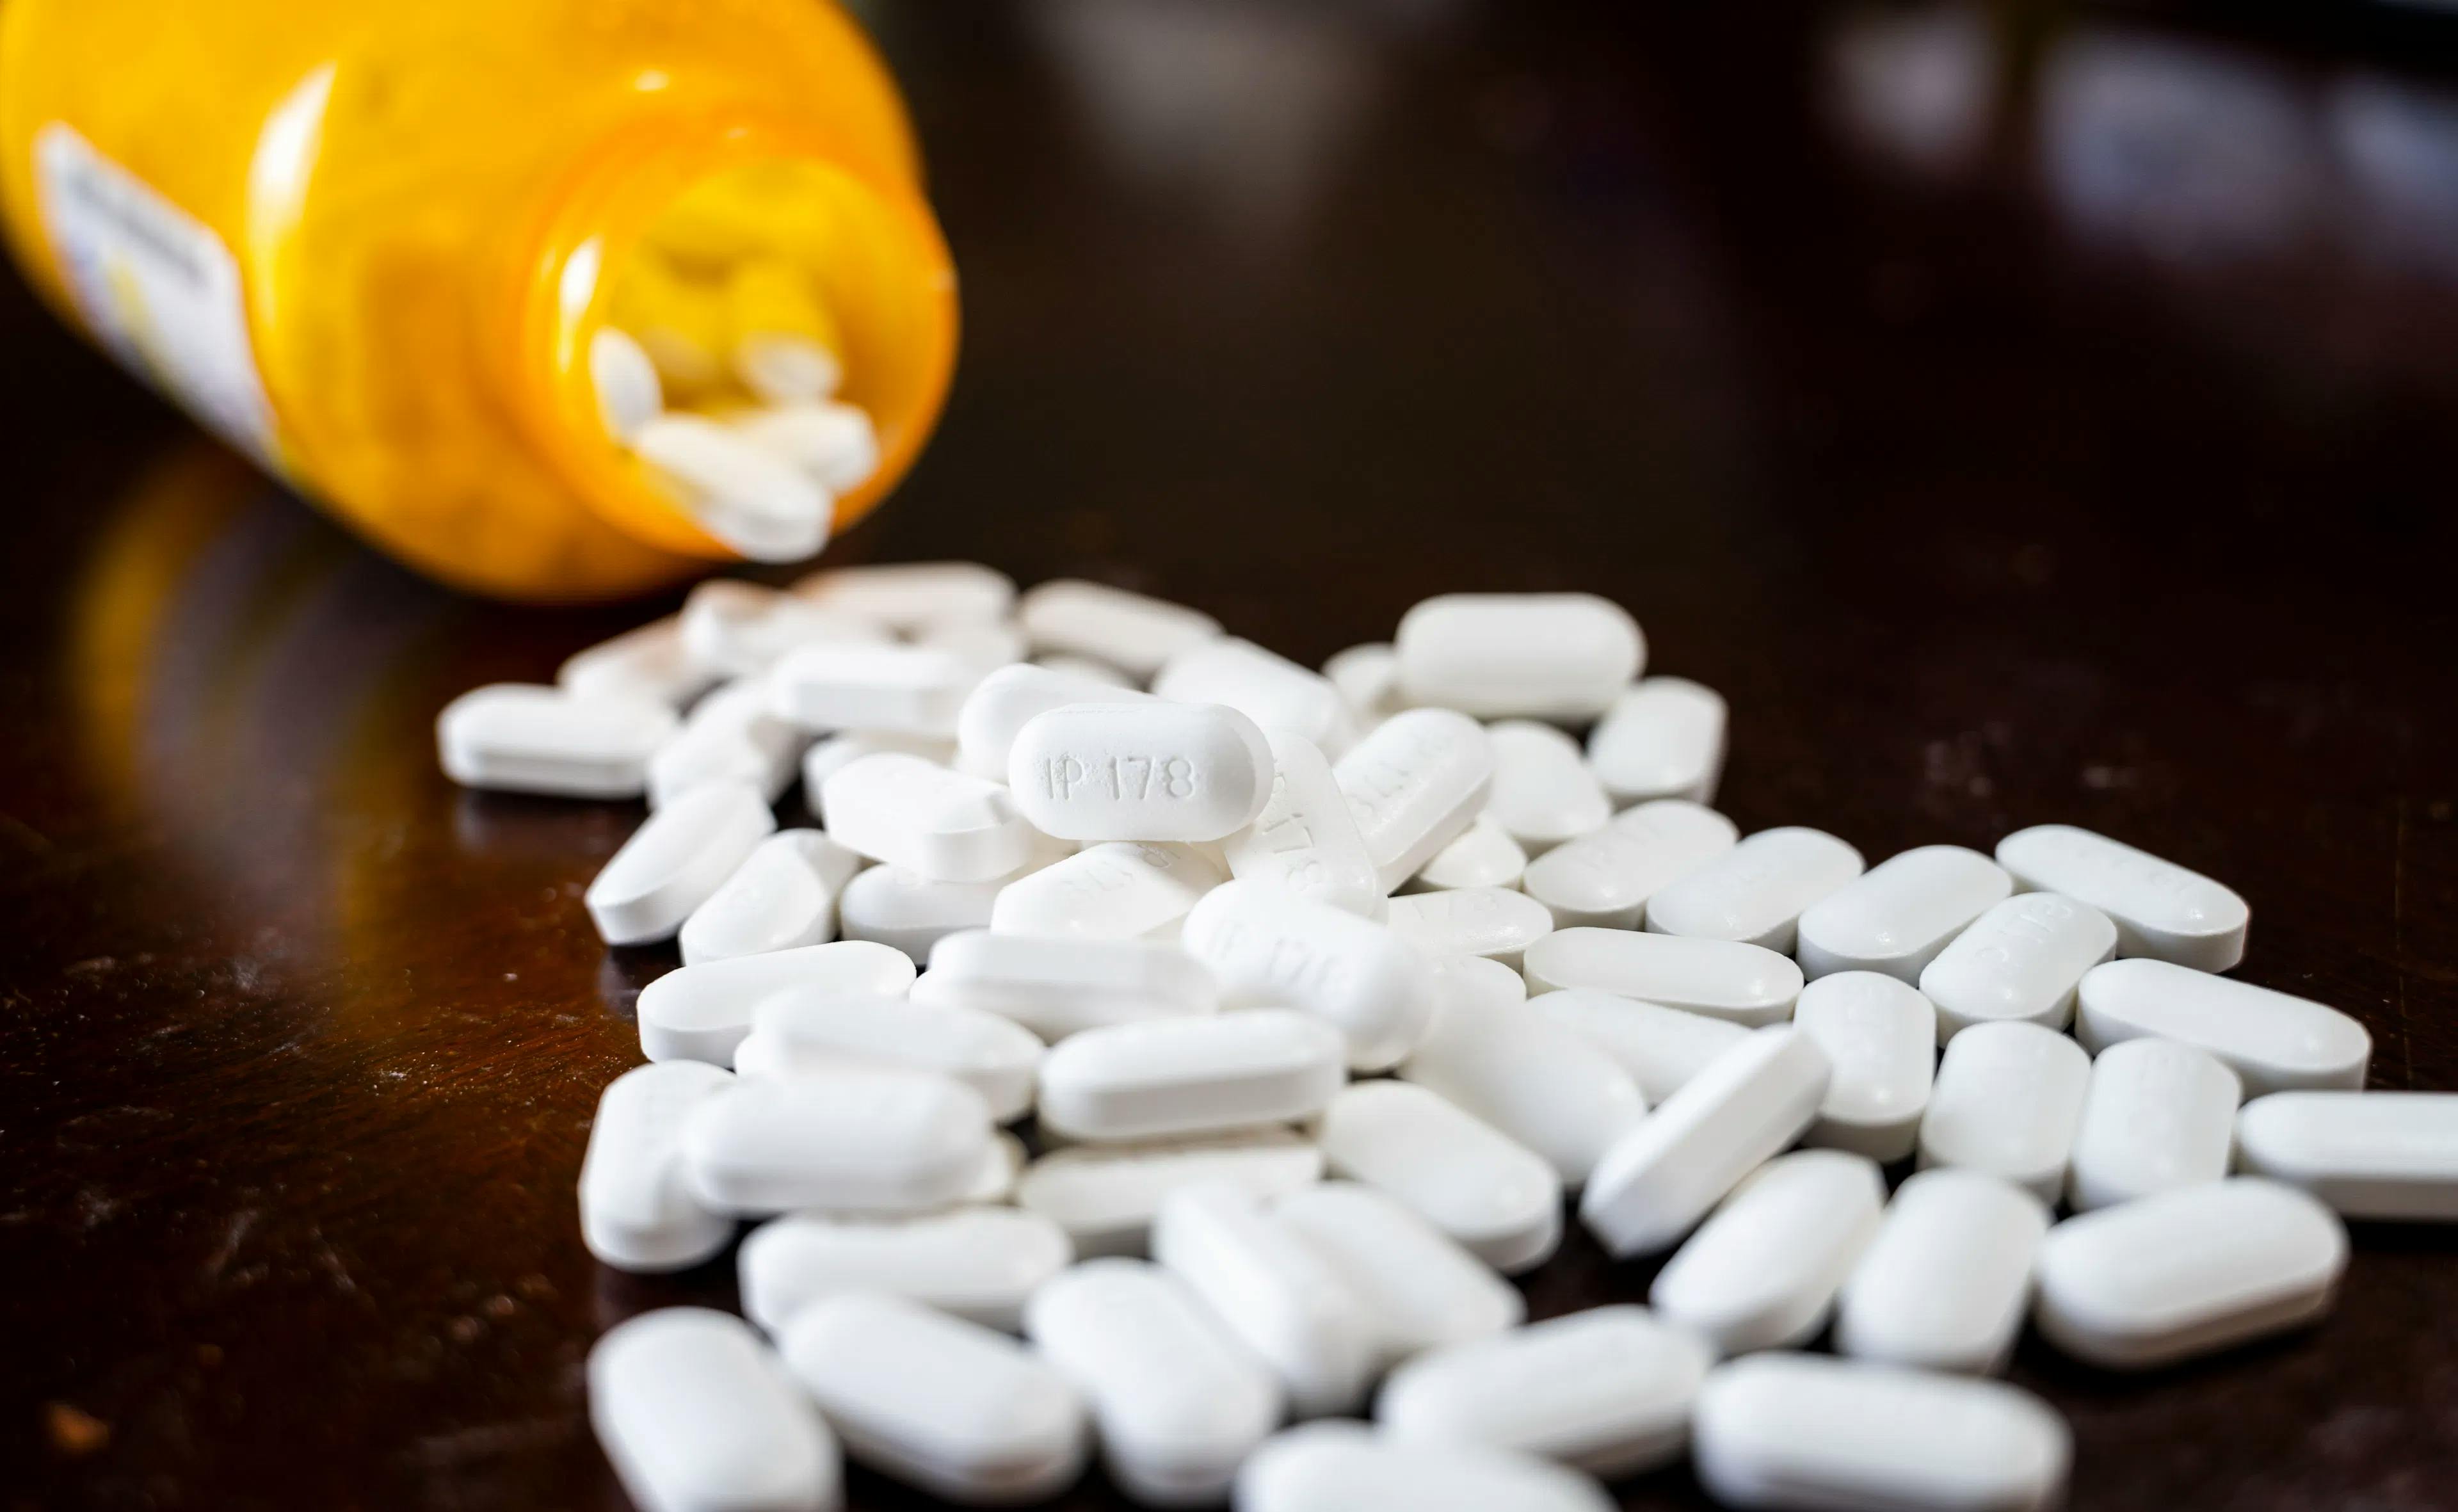 Metformin and Ozempic: Understanding Key Differences and Benefits